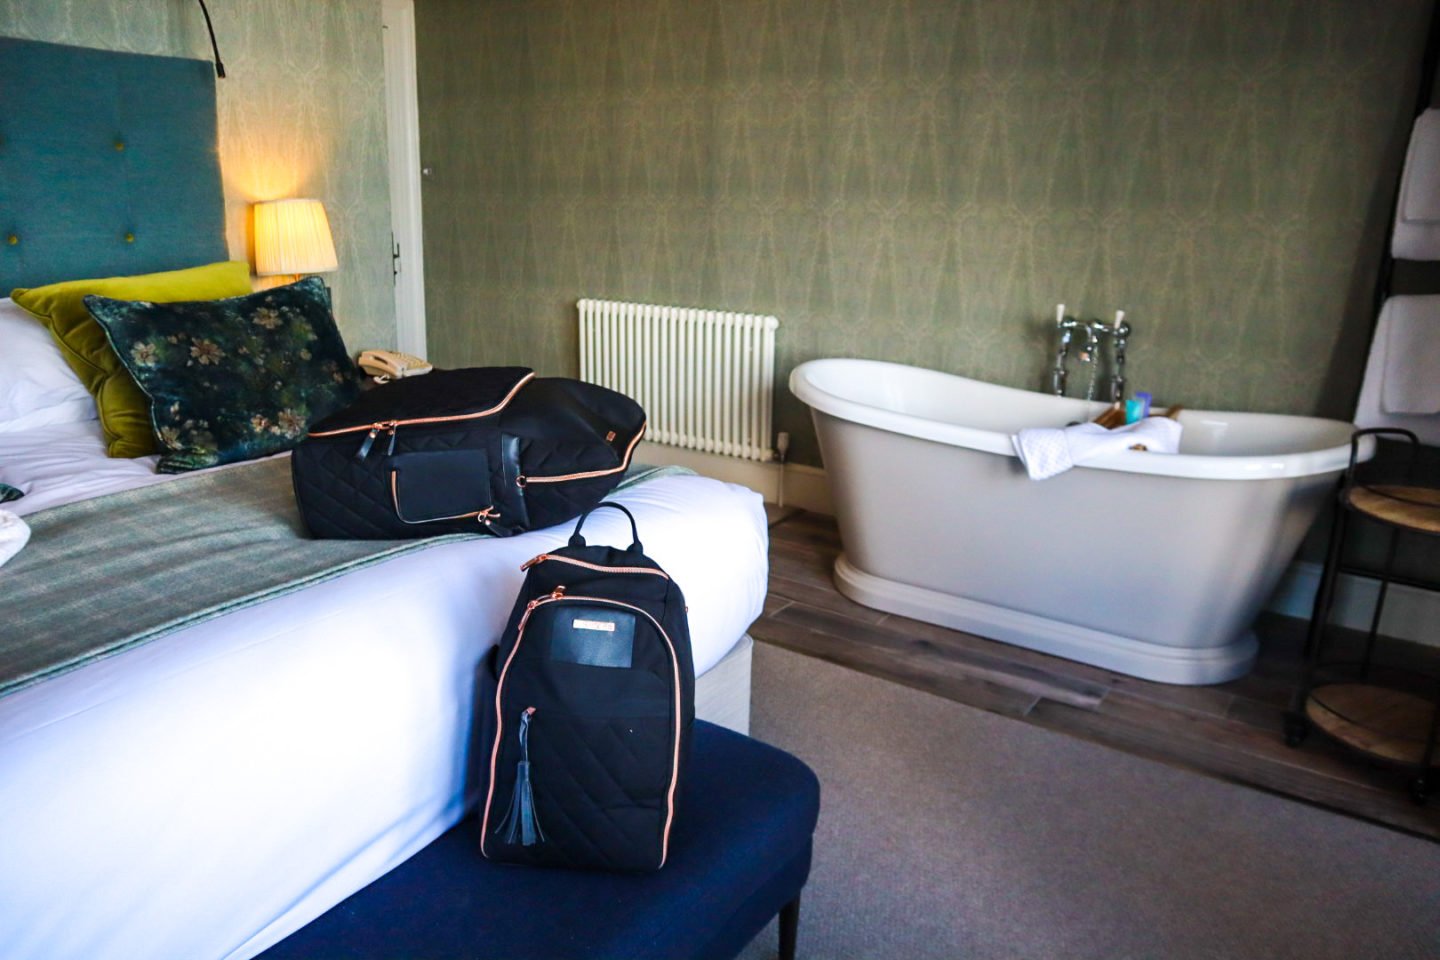 The Travel hack bags at Carbis Bay Hotel and Spa 